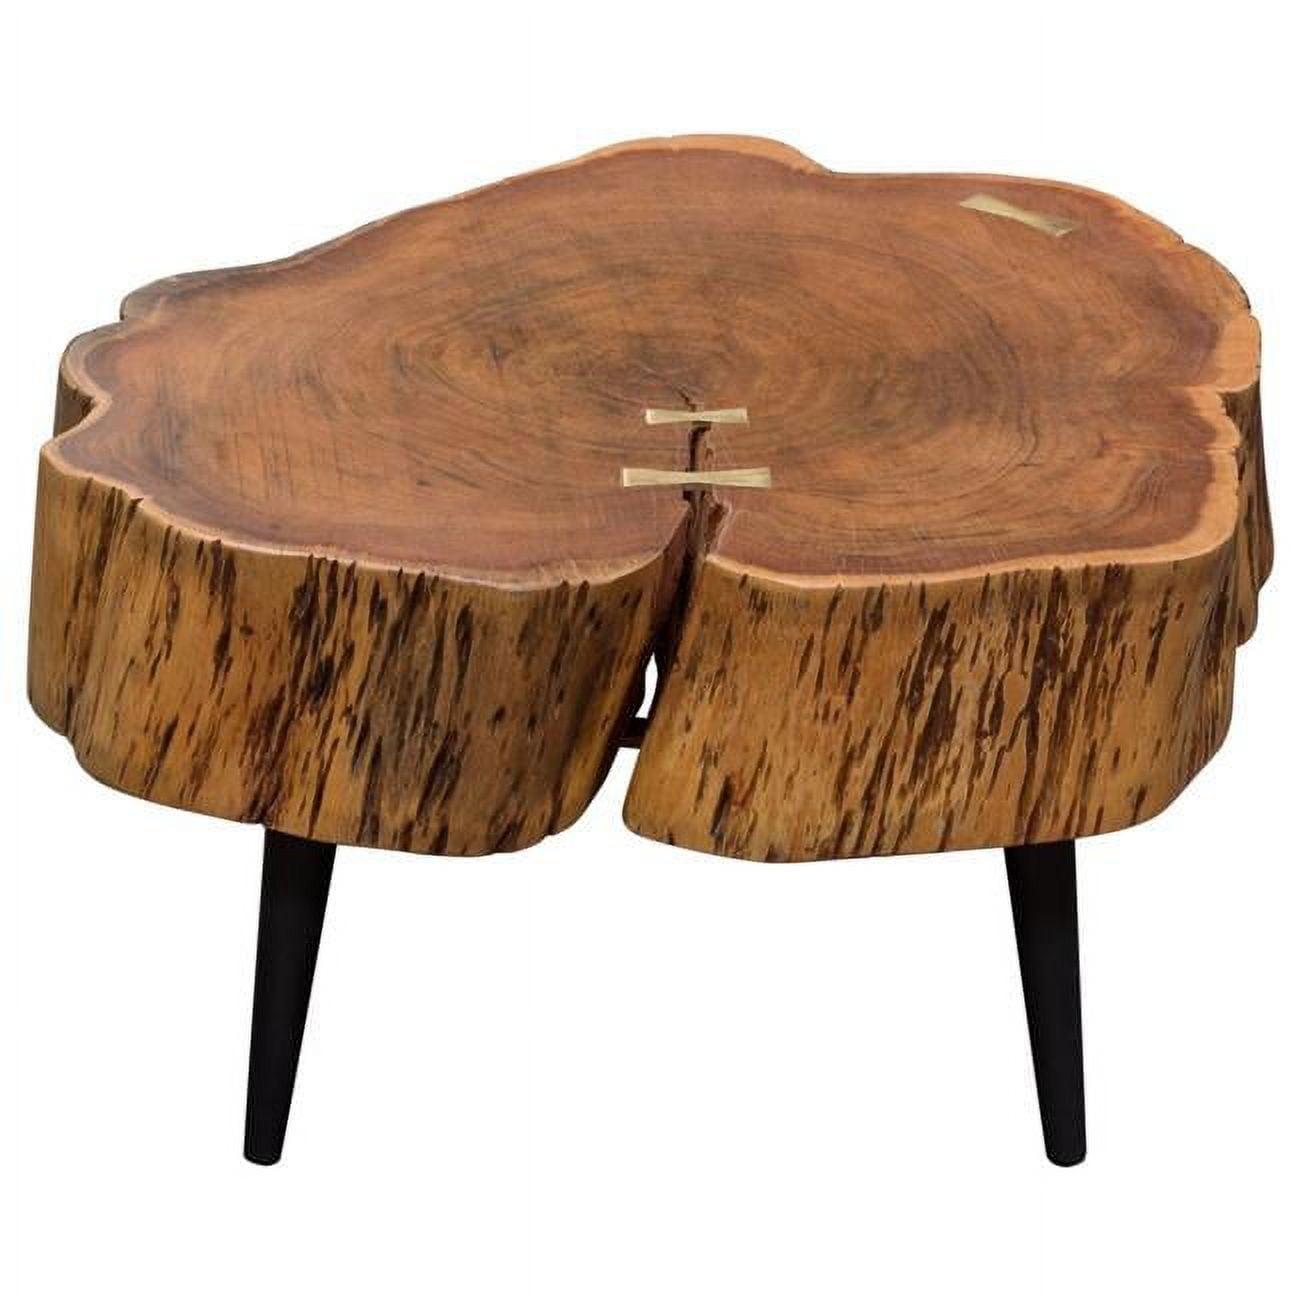 Contemporary Acacia Wood Cocktail Table with Black Metal Legs